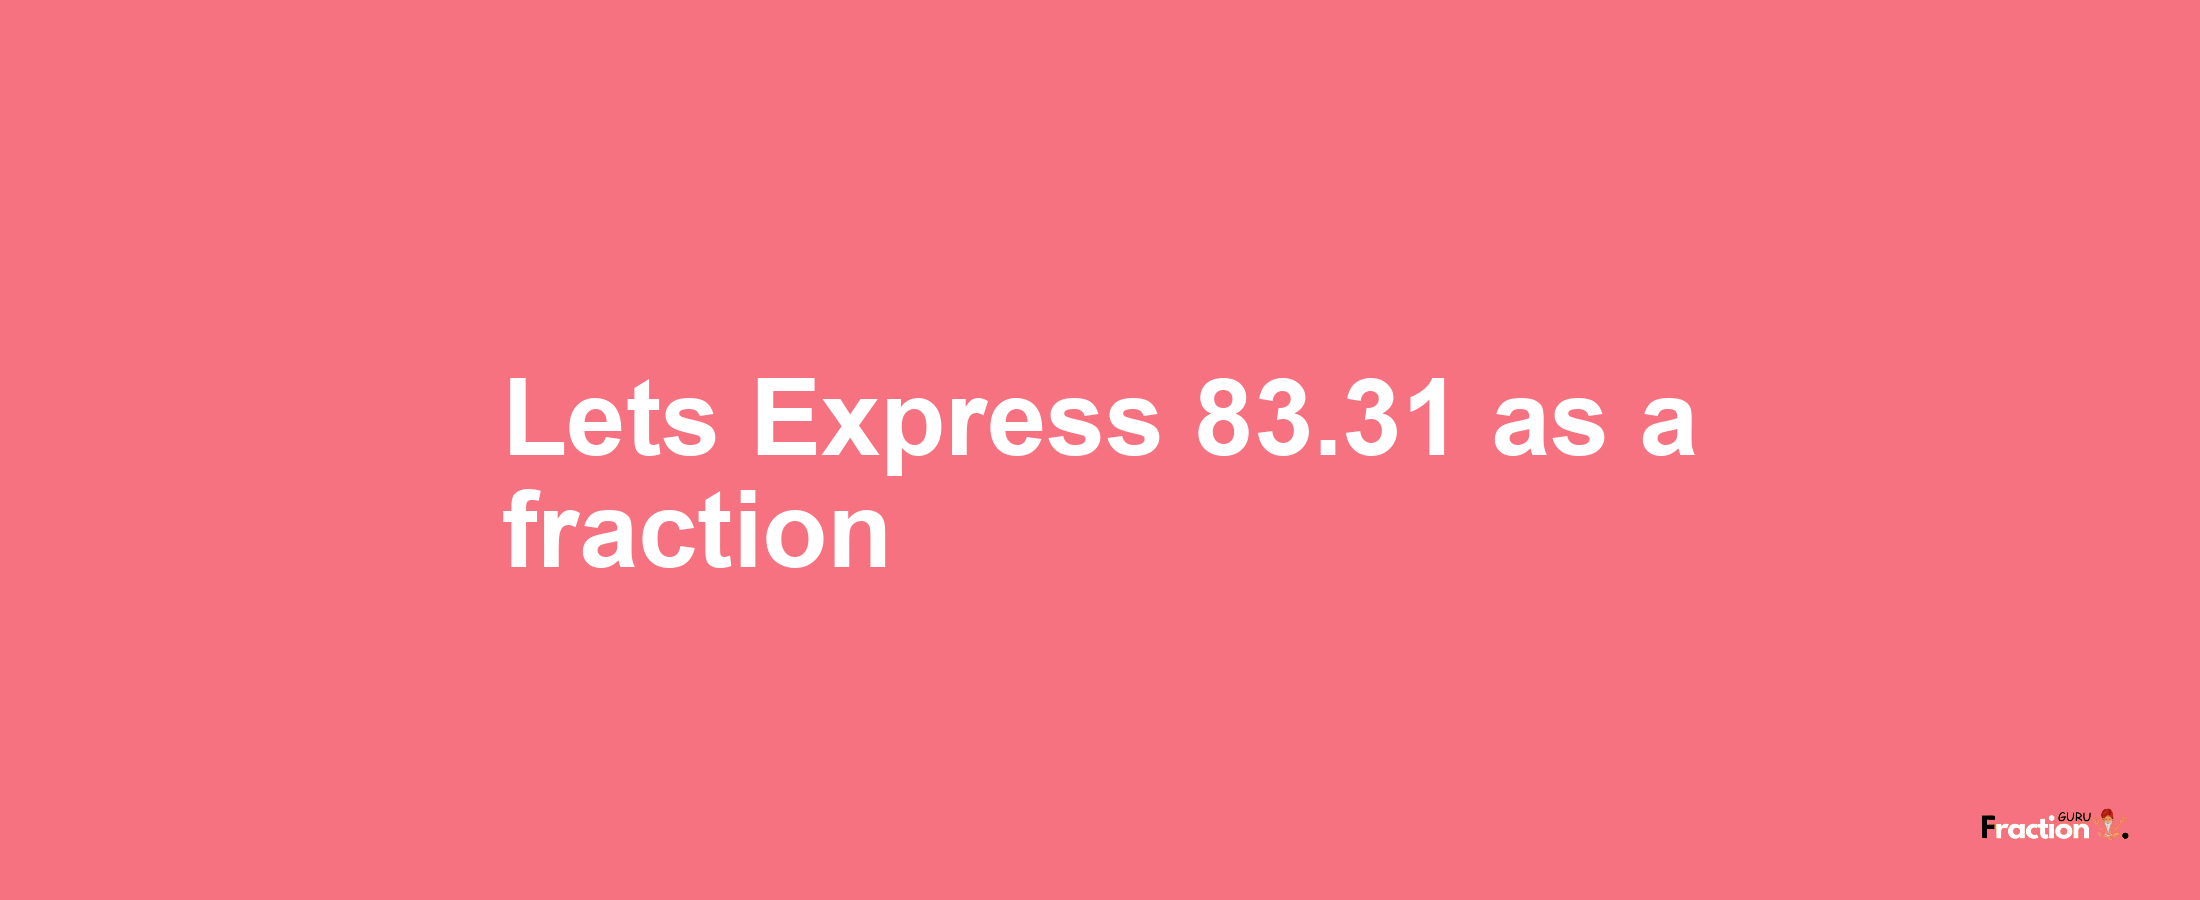 Lets Express 83.31 as afraction